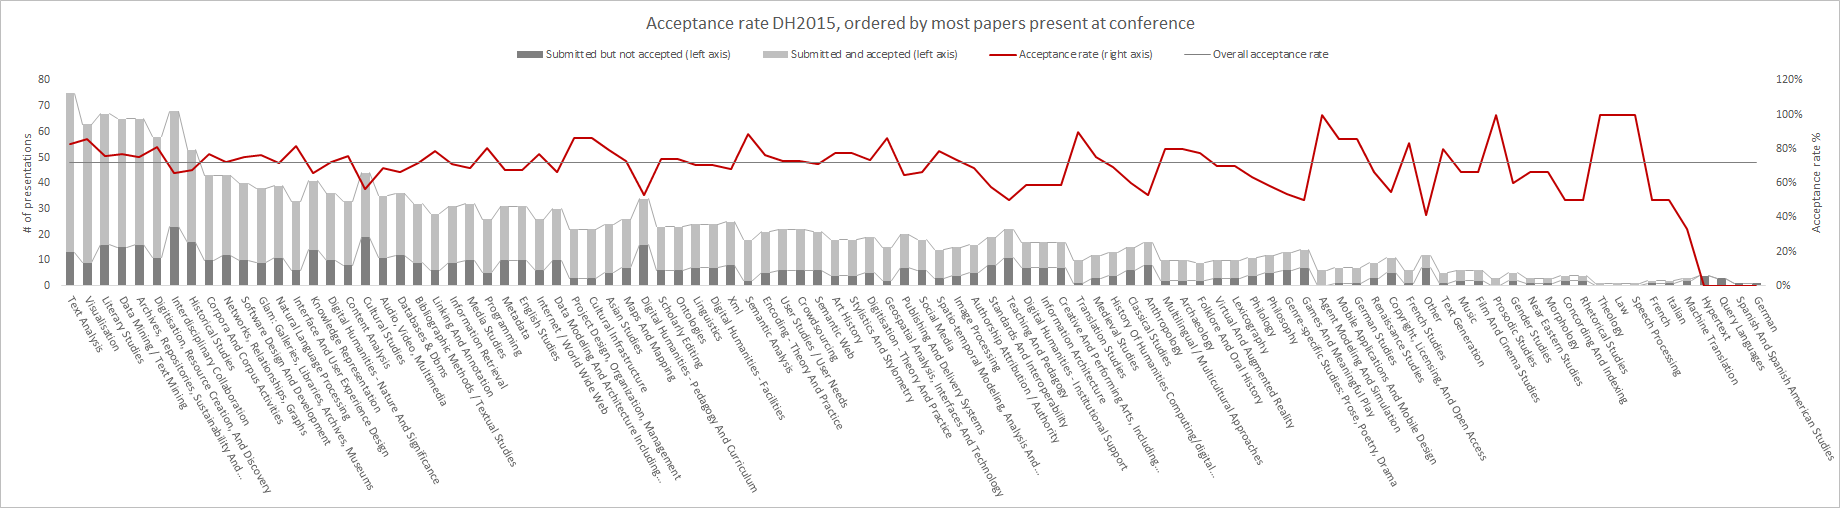 Figure 2. Acceptance rates of topics to DH2015, sorted by volume.